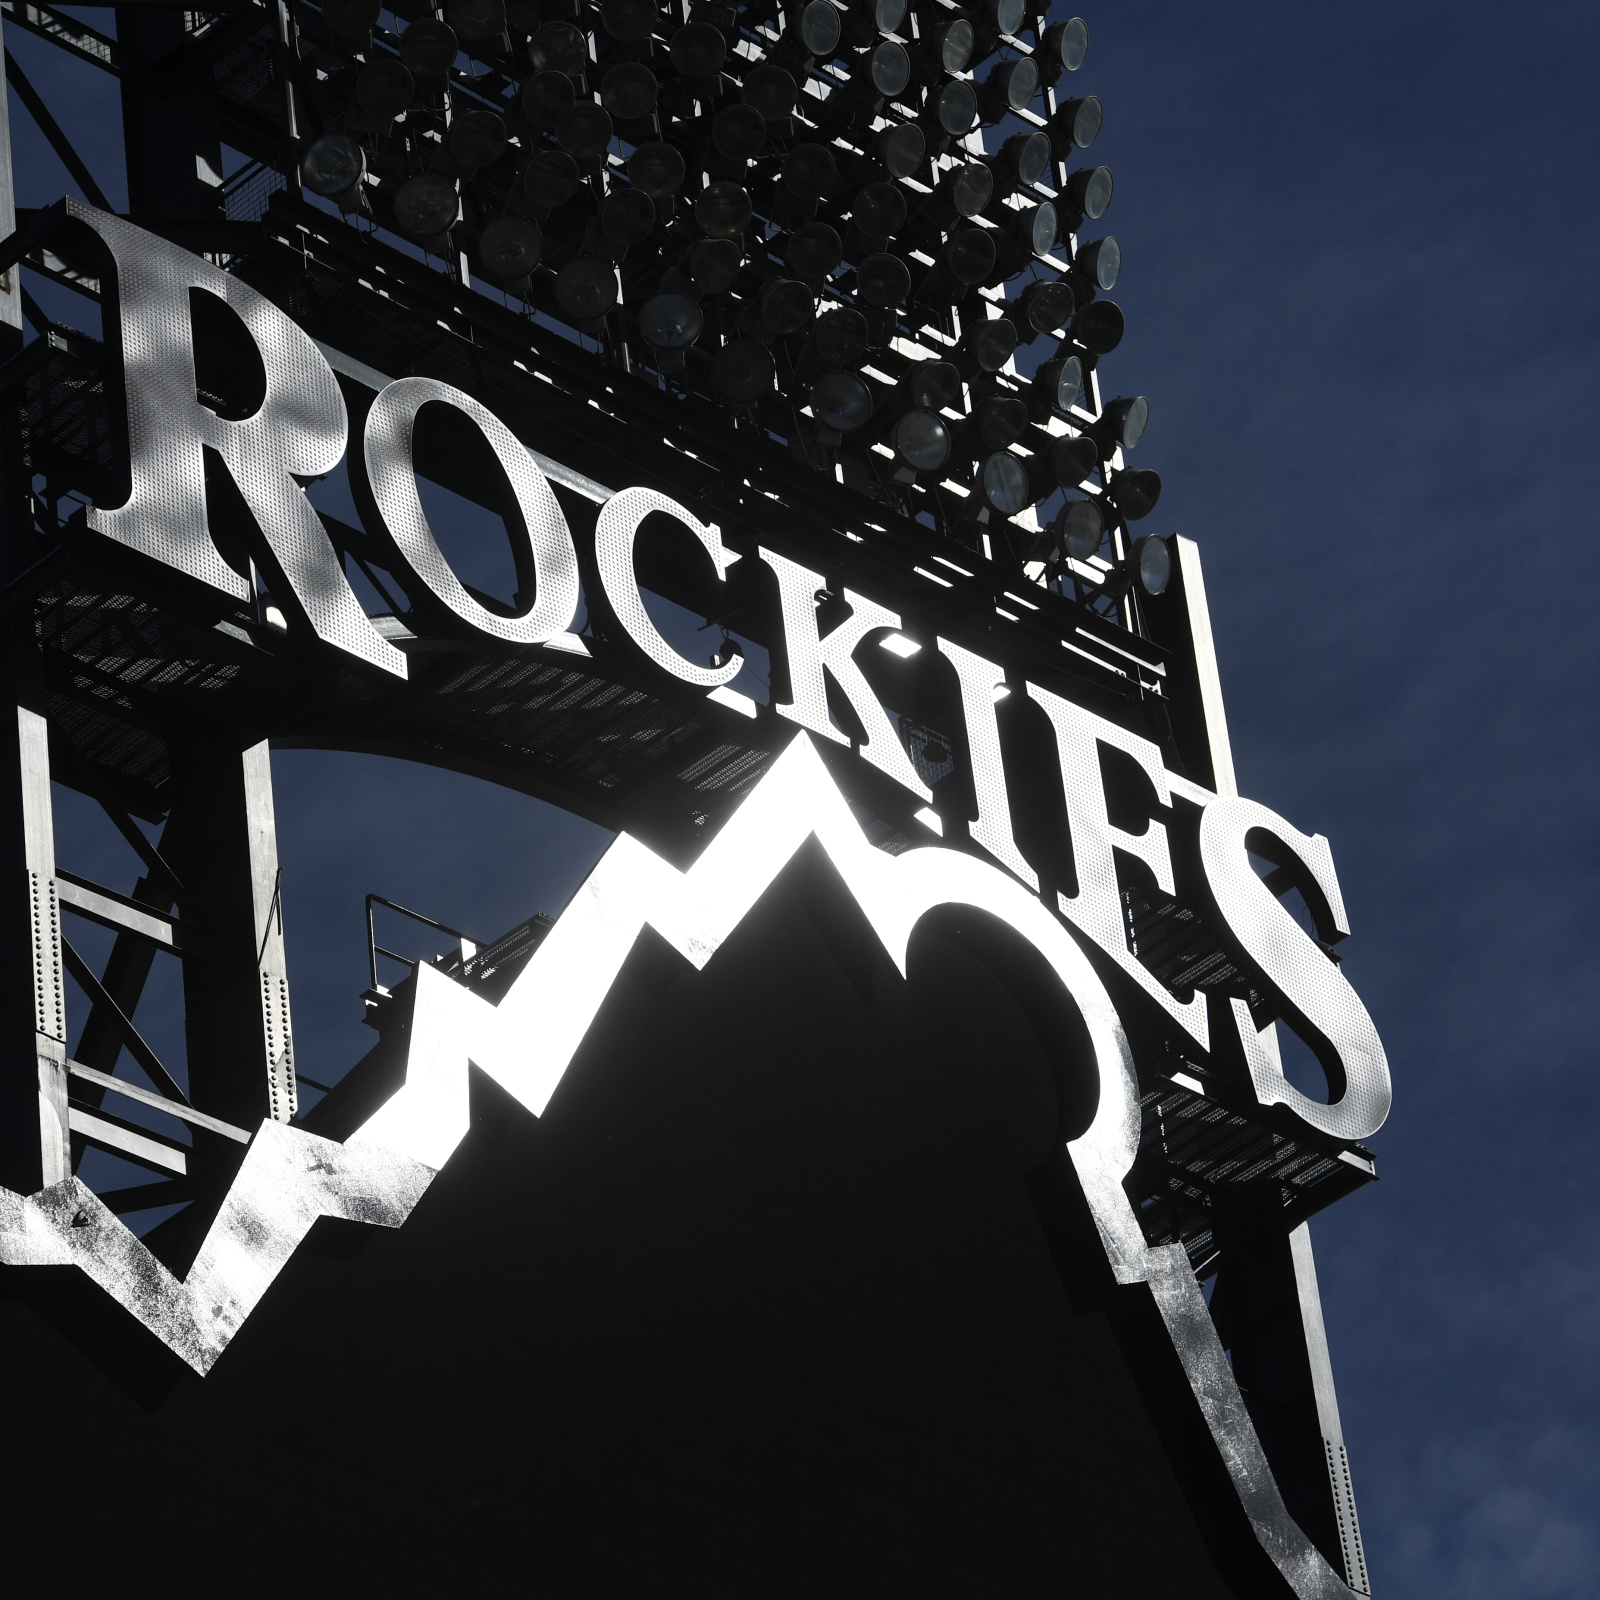 Rockies investigation found fan called at team's mascot Dinger